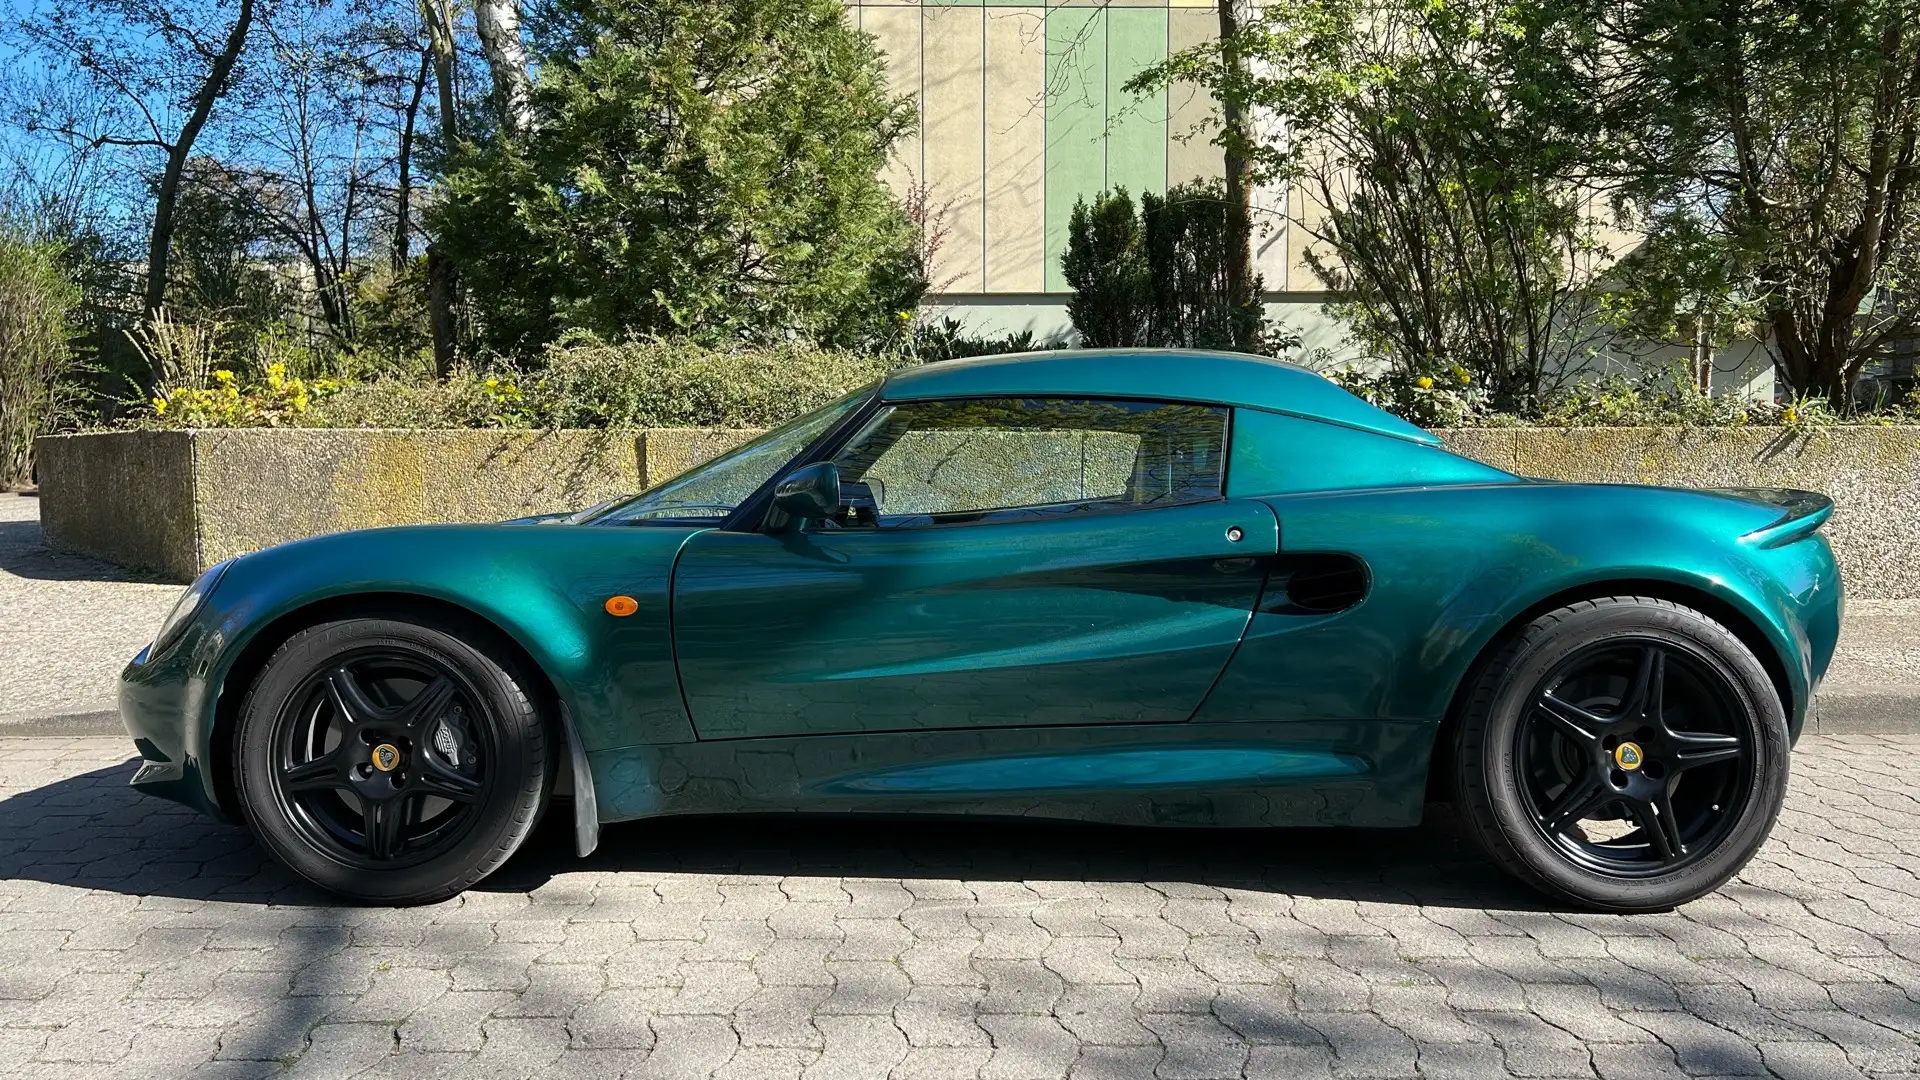 Lotus Elise LHD, Rotec, sehr guter Zustand Green - 1